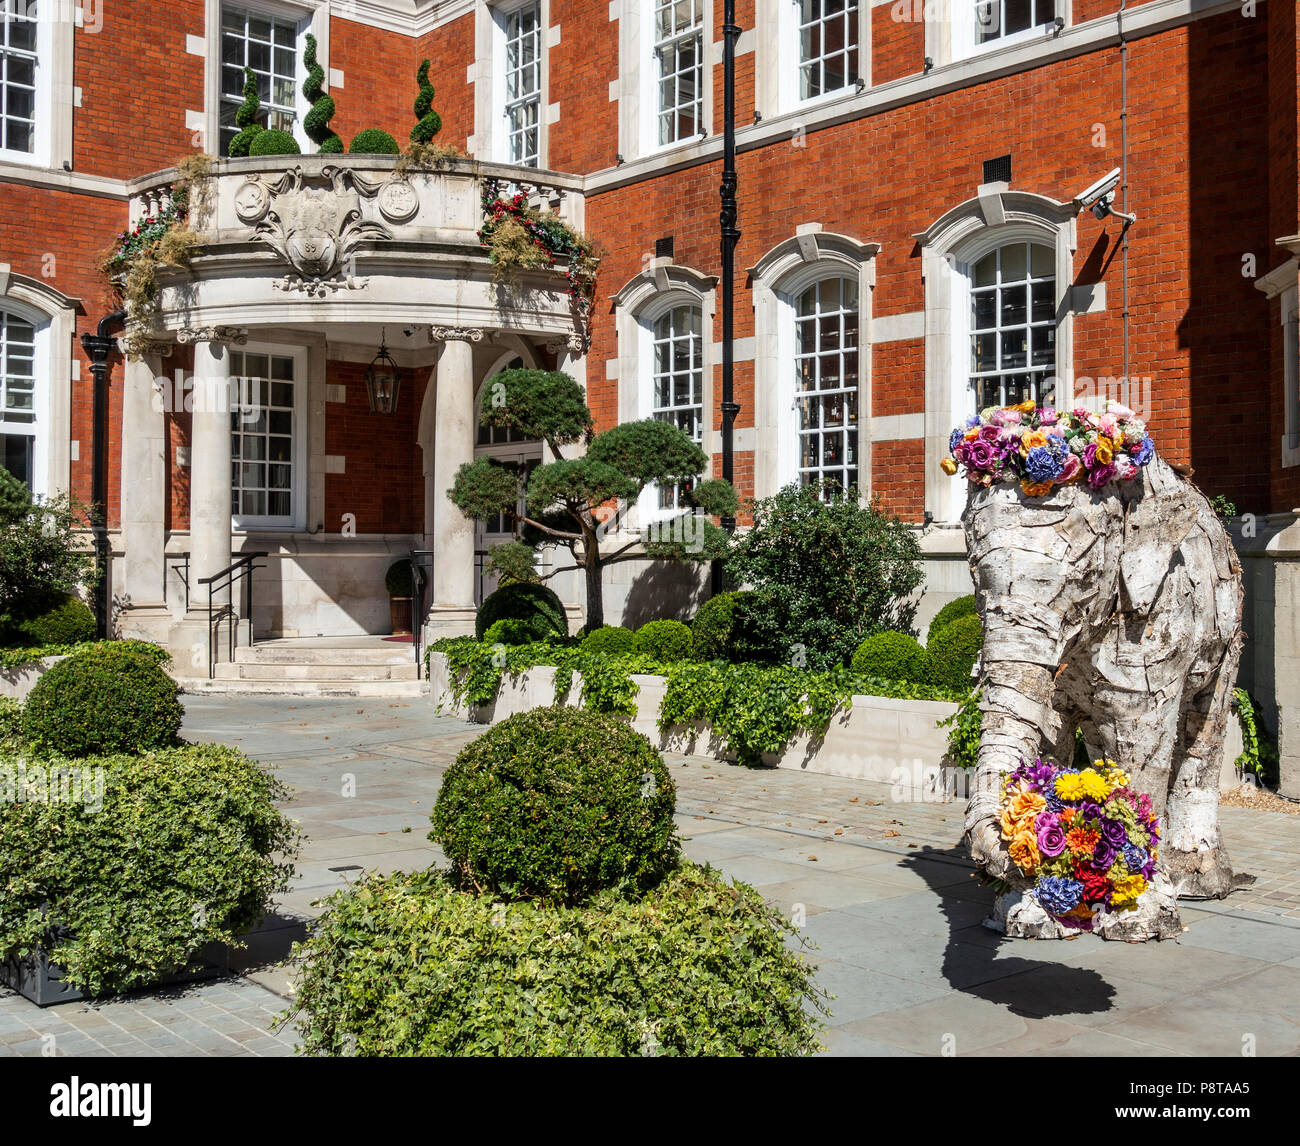 Main entrance to the Indian-owned five star LaLit Hotel in central London, with part of the garden and a welcoming elephant sculpture Stock Photo